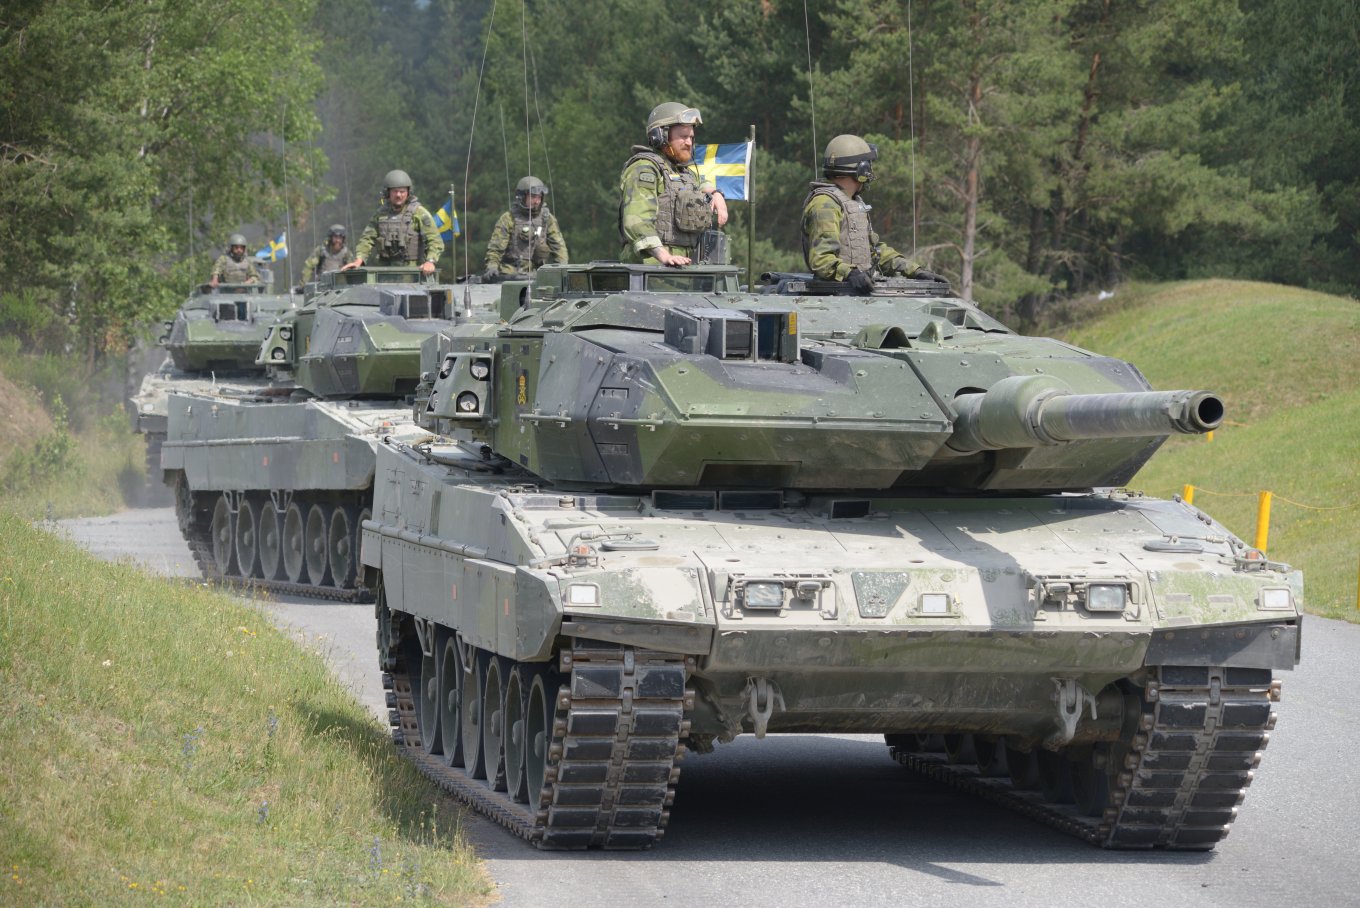 Stridsvagn 122 – the Swedish version of Leopard 2A5